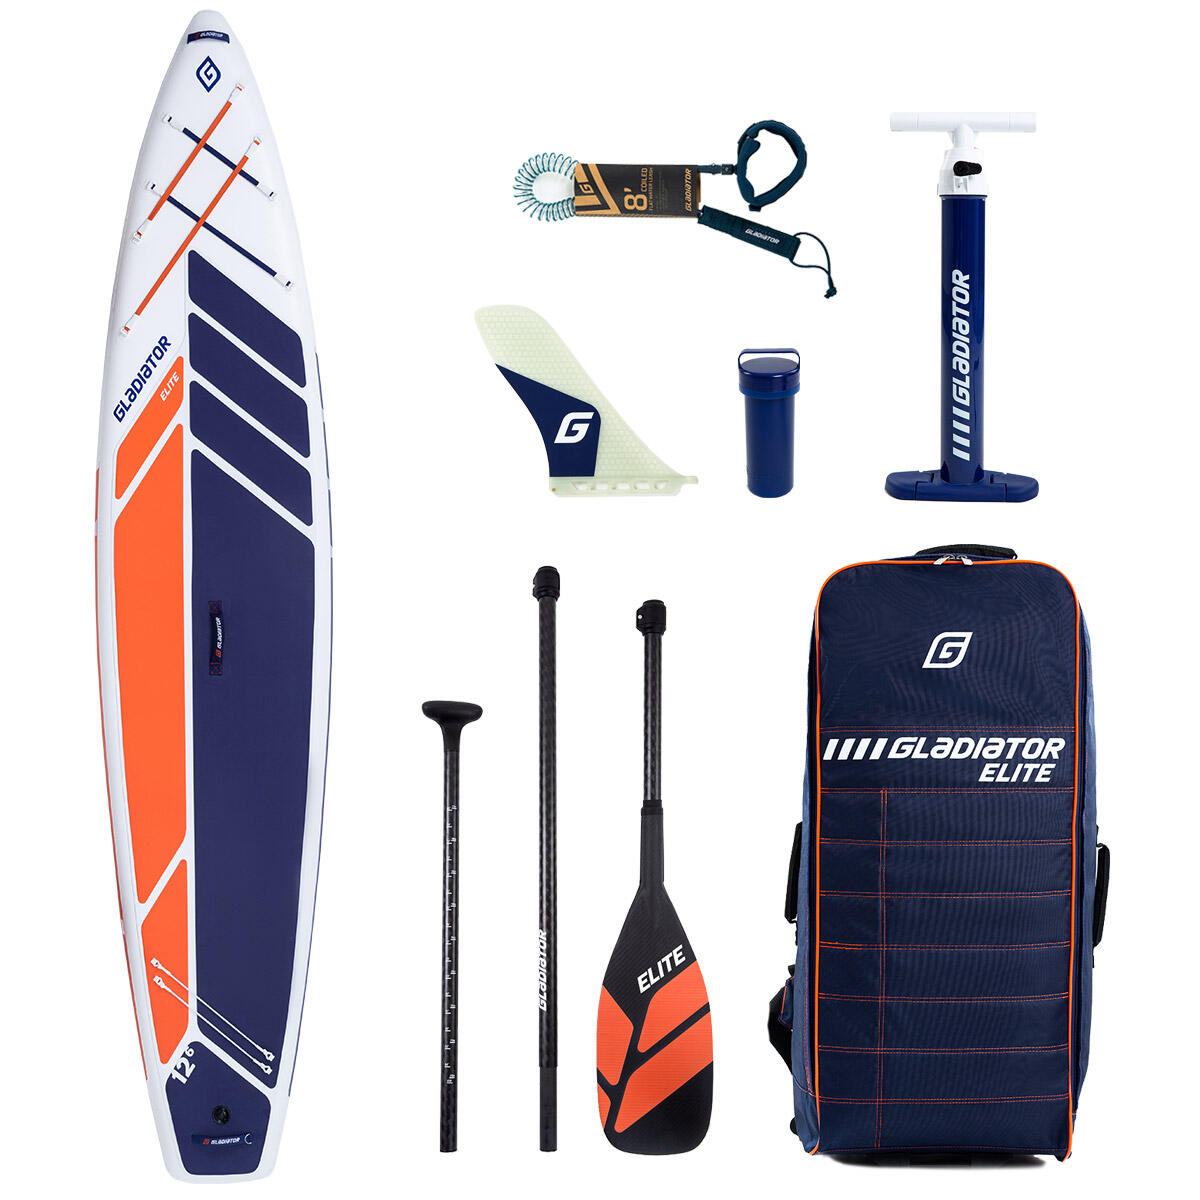 Gladiator Elite Touring 12'6 x 32” x 5.9” Touring Paddle Board For Stability 1/7